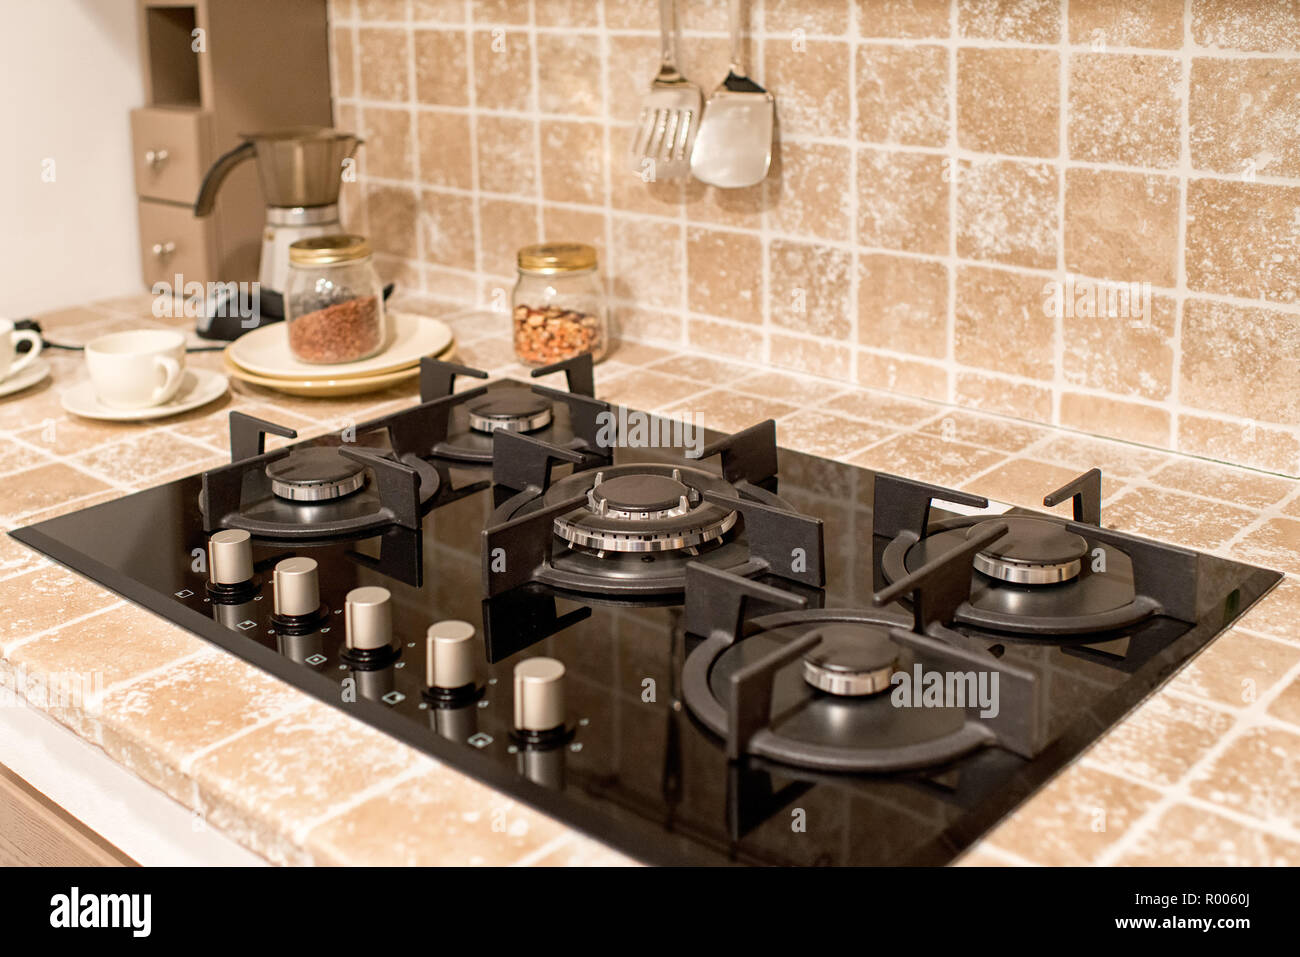 Fitted gas burner with five hotplates in a tiled kitchen counter with splash back in a close up view Stock Photo